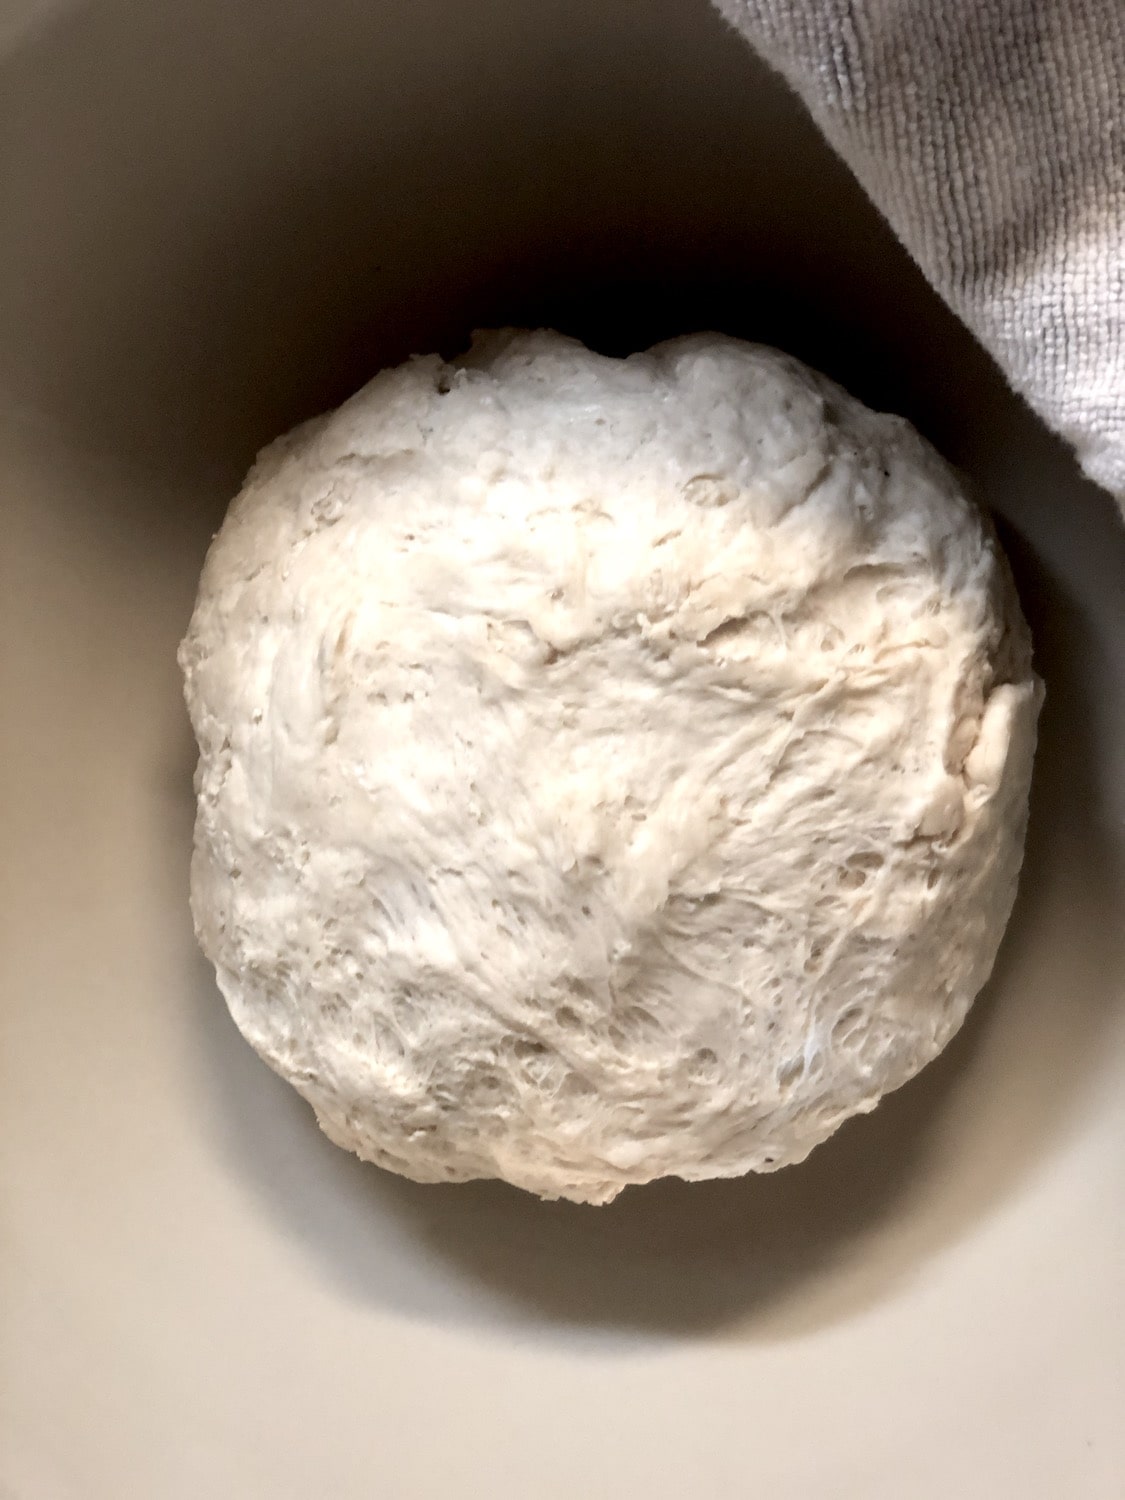 Dough formed into a ball in the middle of a bowl